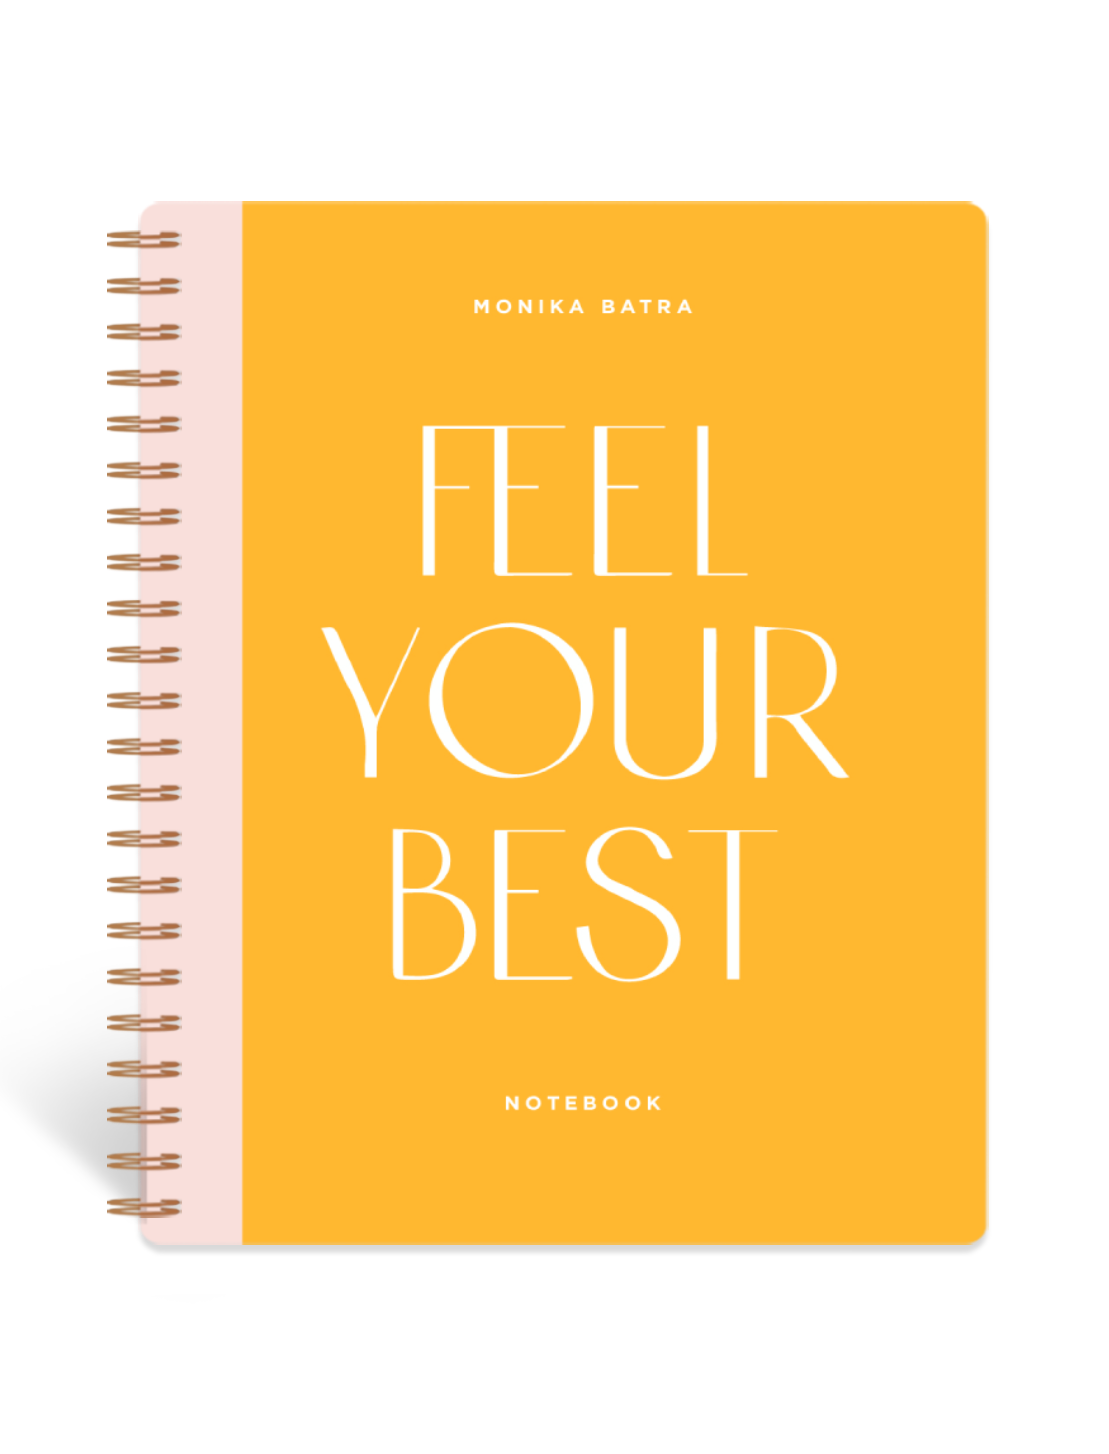 Feel Your Best